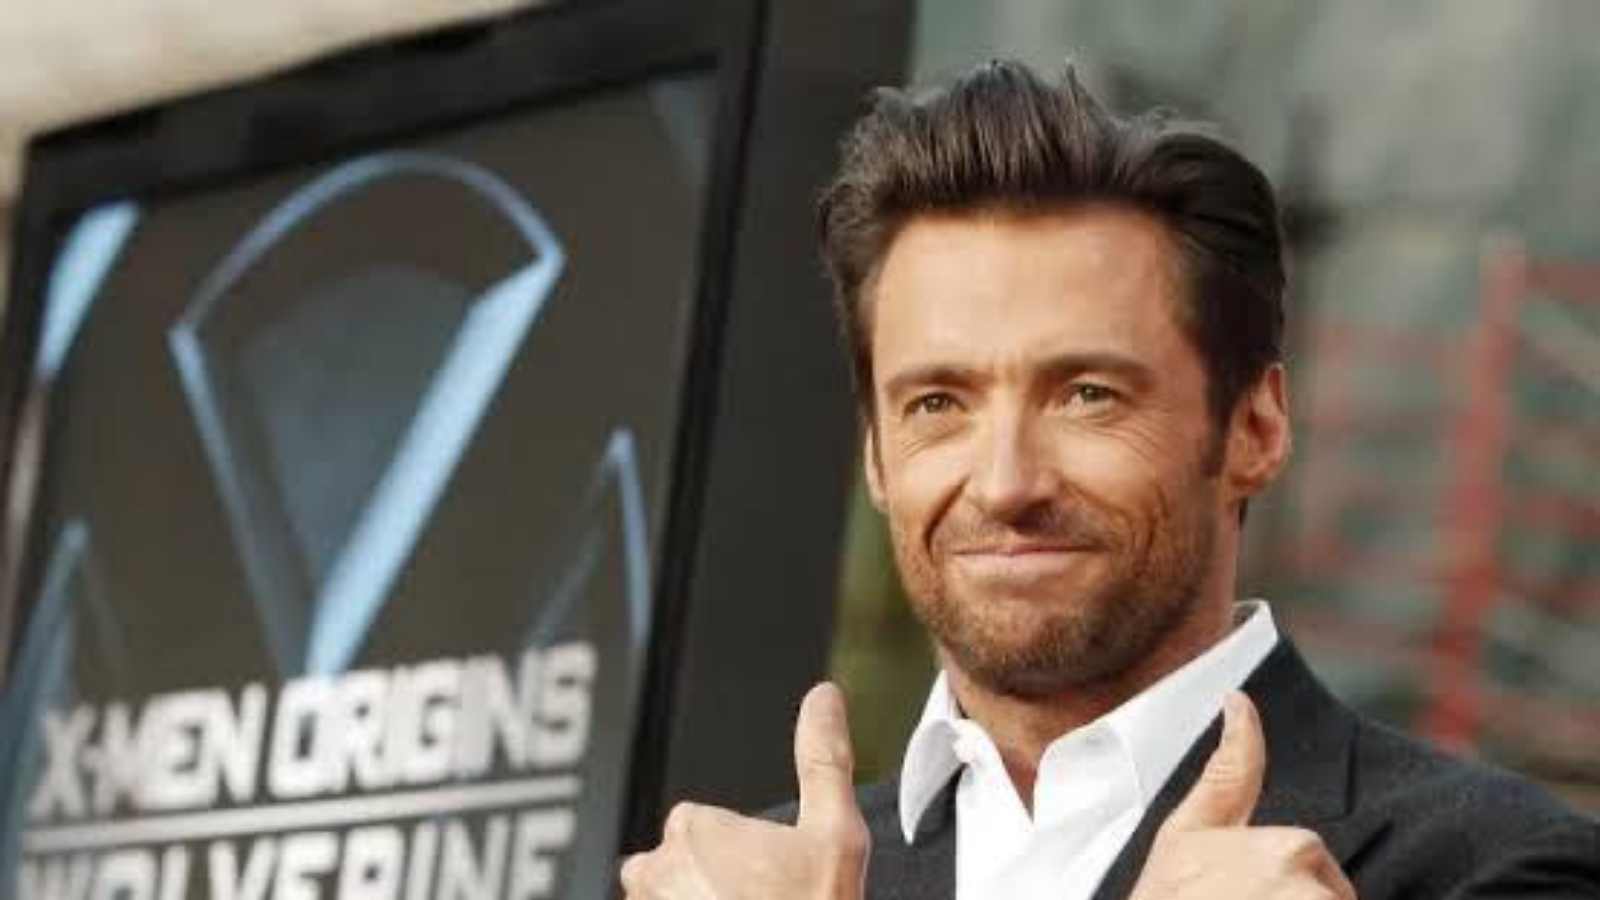 Hugh Jackman is one of the most educated Hollywood stars